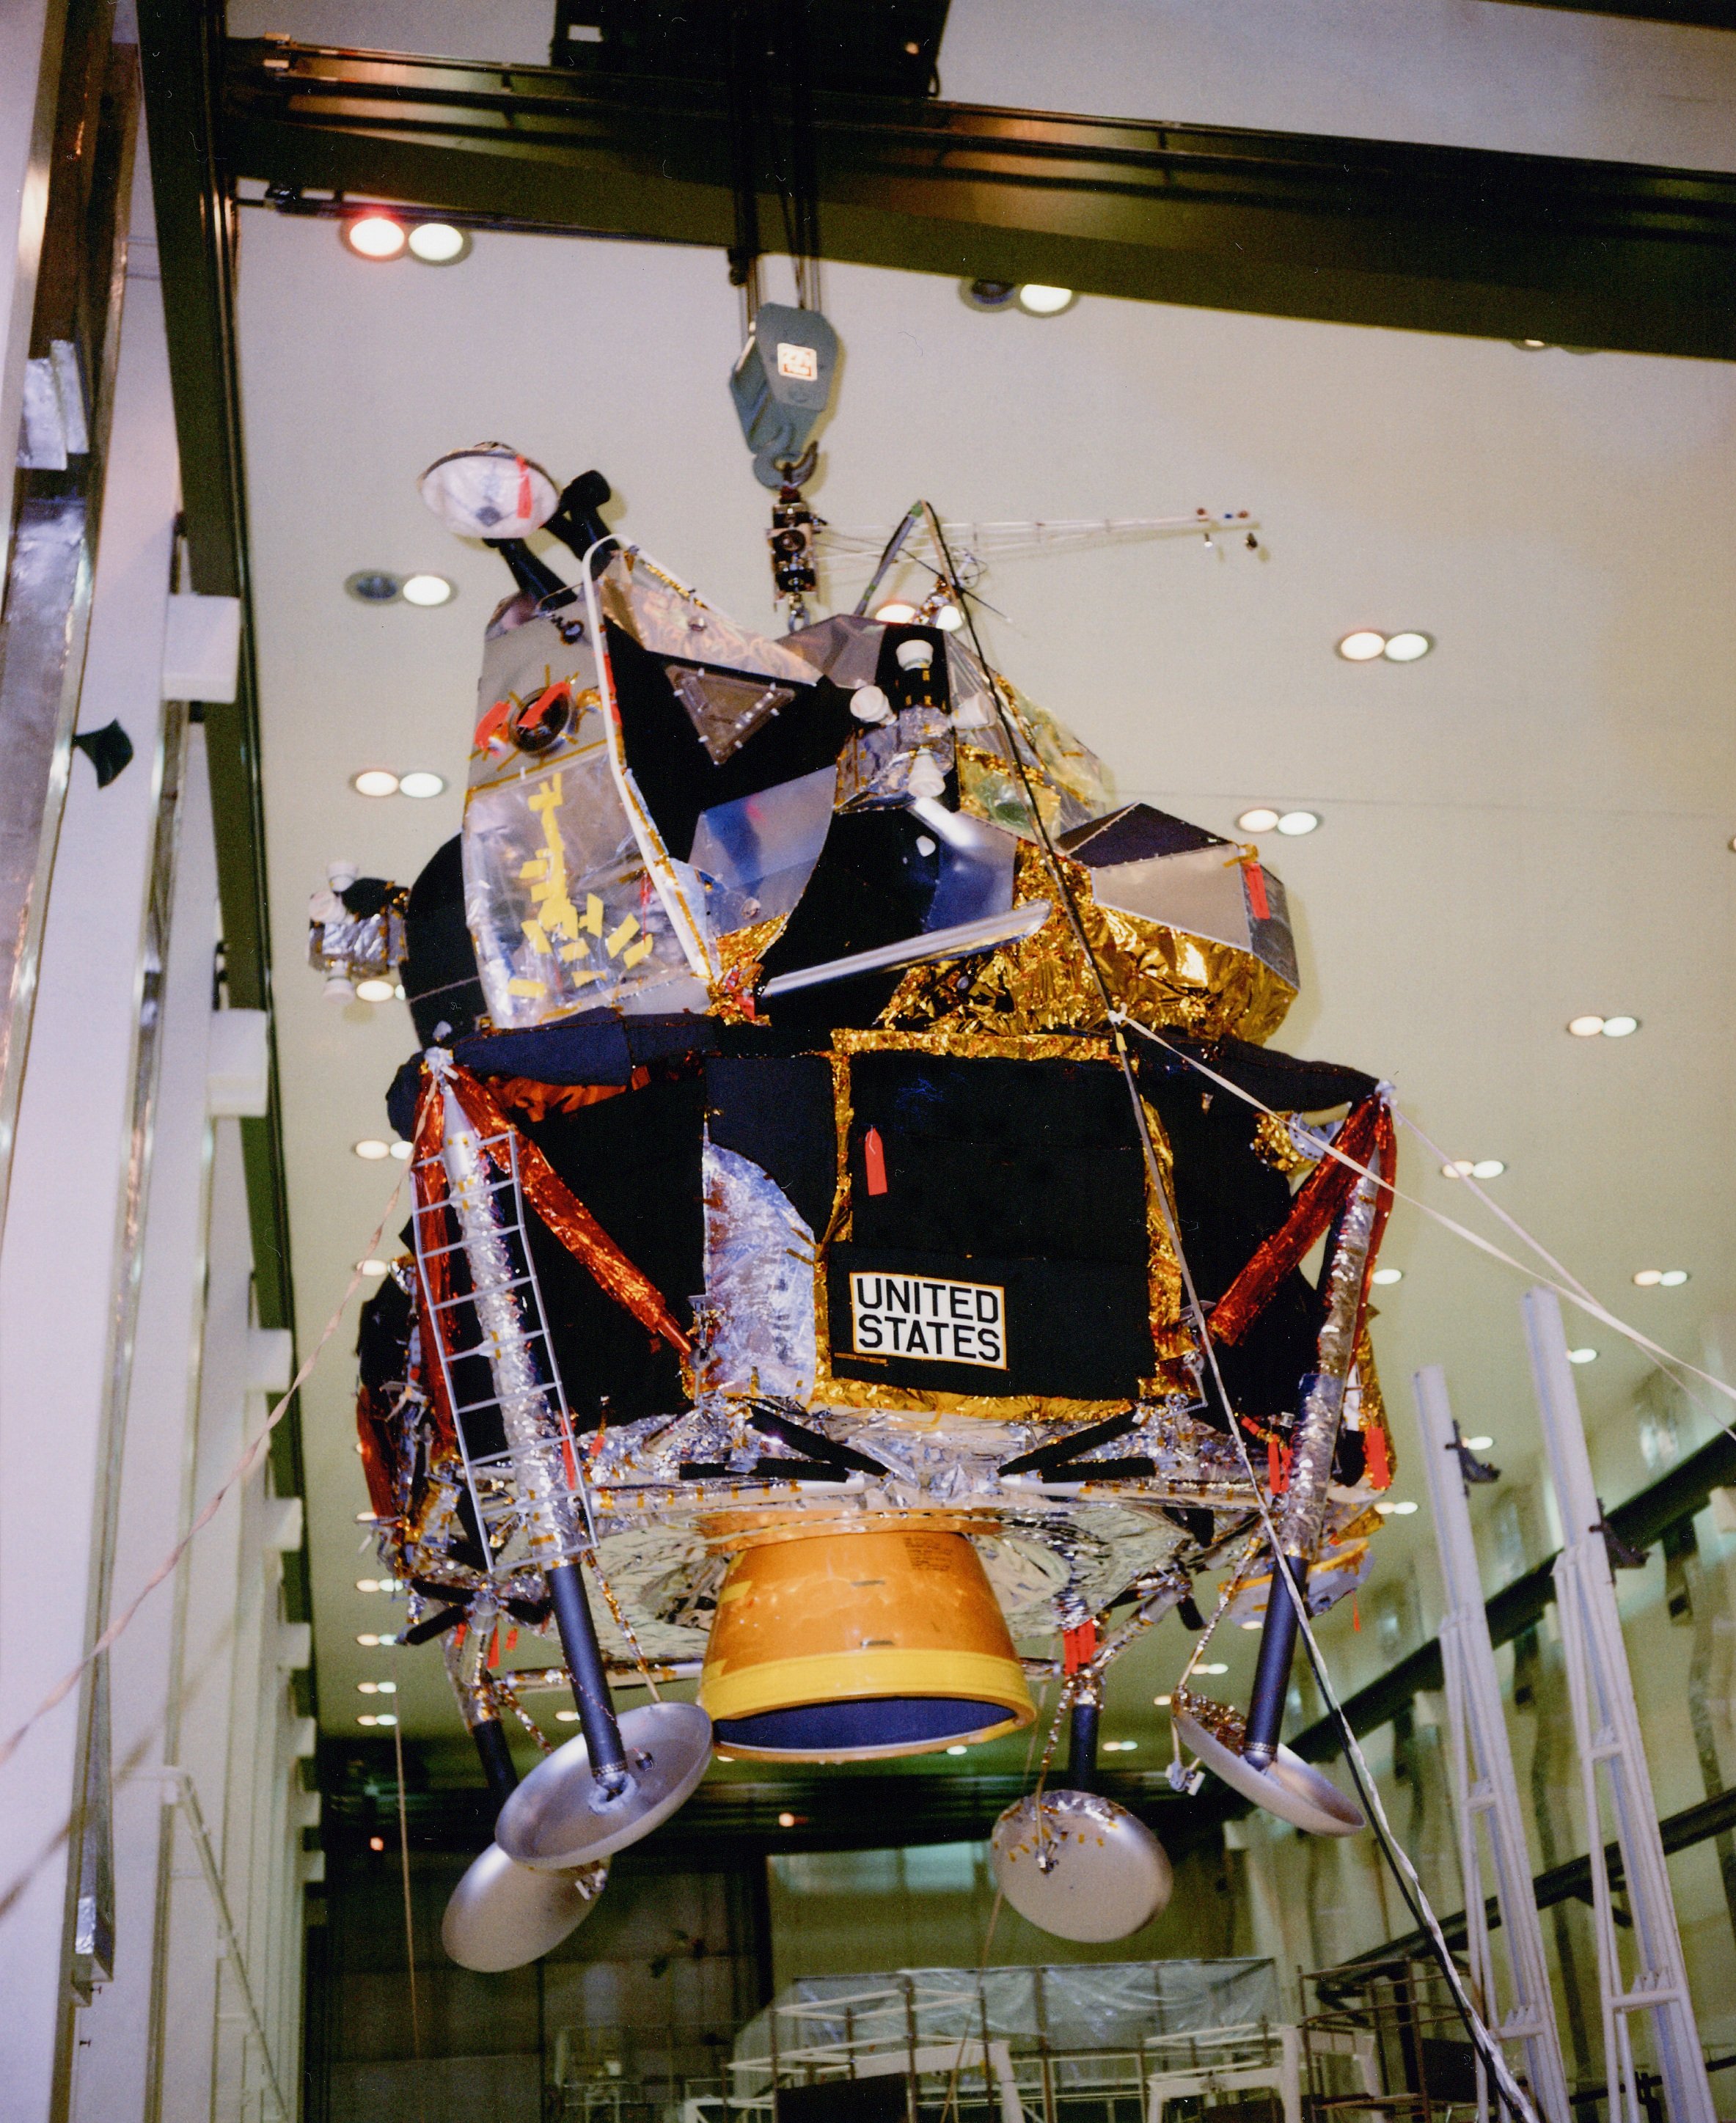 In KSC’s Manned Spacecraft Operations Building (MSOB), workers remove the Lunar Module (LM) from an altitude chamber